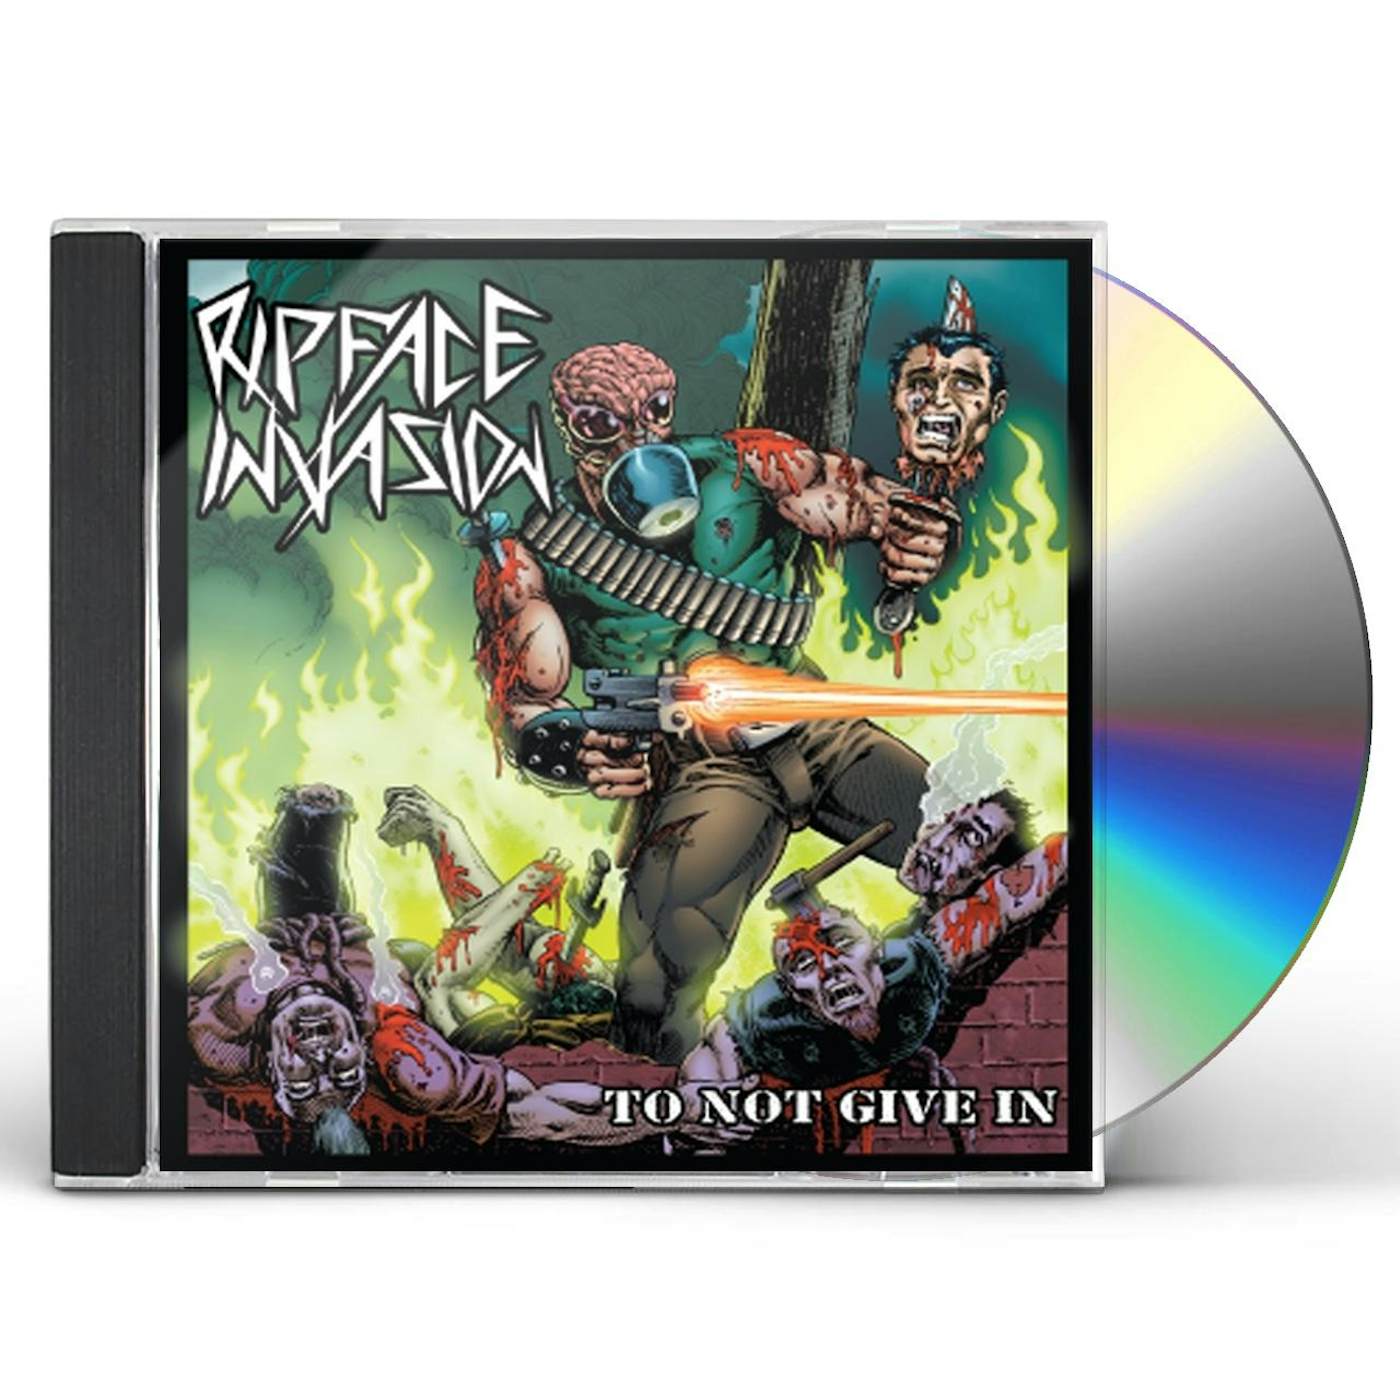 Ripface Invasion TO NOT GIVE IN CD